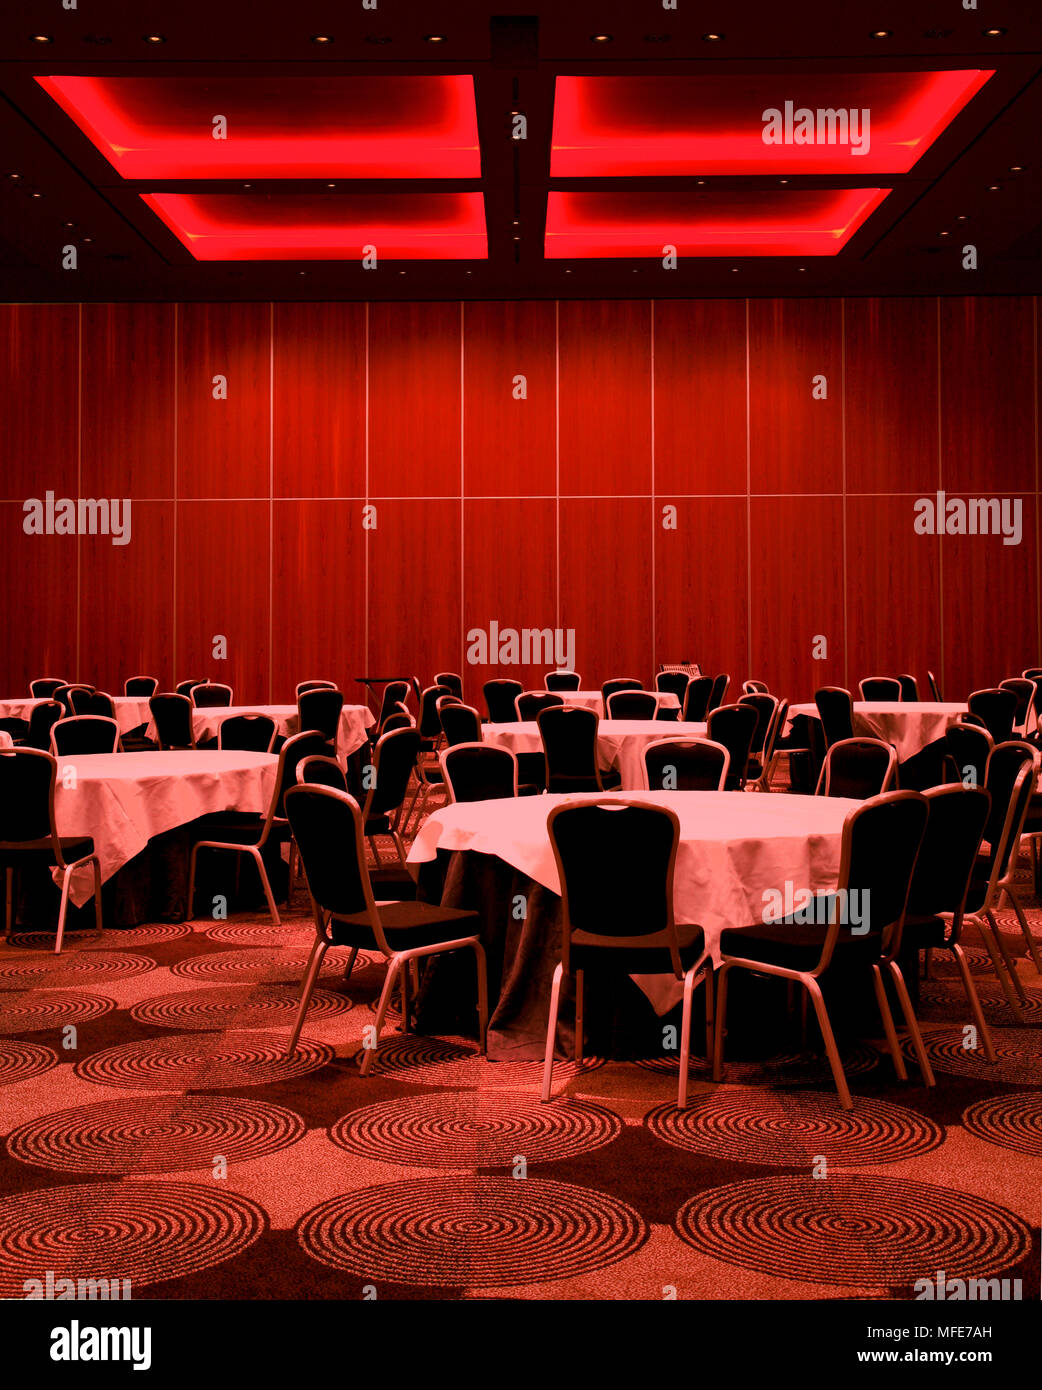 Convention and conference room illuminated in red. Sofitel London Heathrow, Hounslow, United Kingdom. Architect: Stephen Williams, 2008. Stock Photo